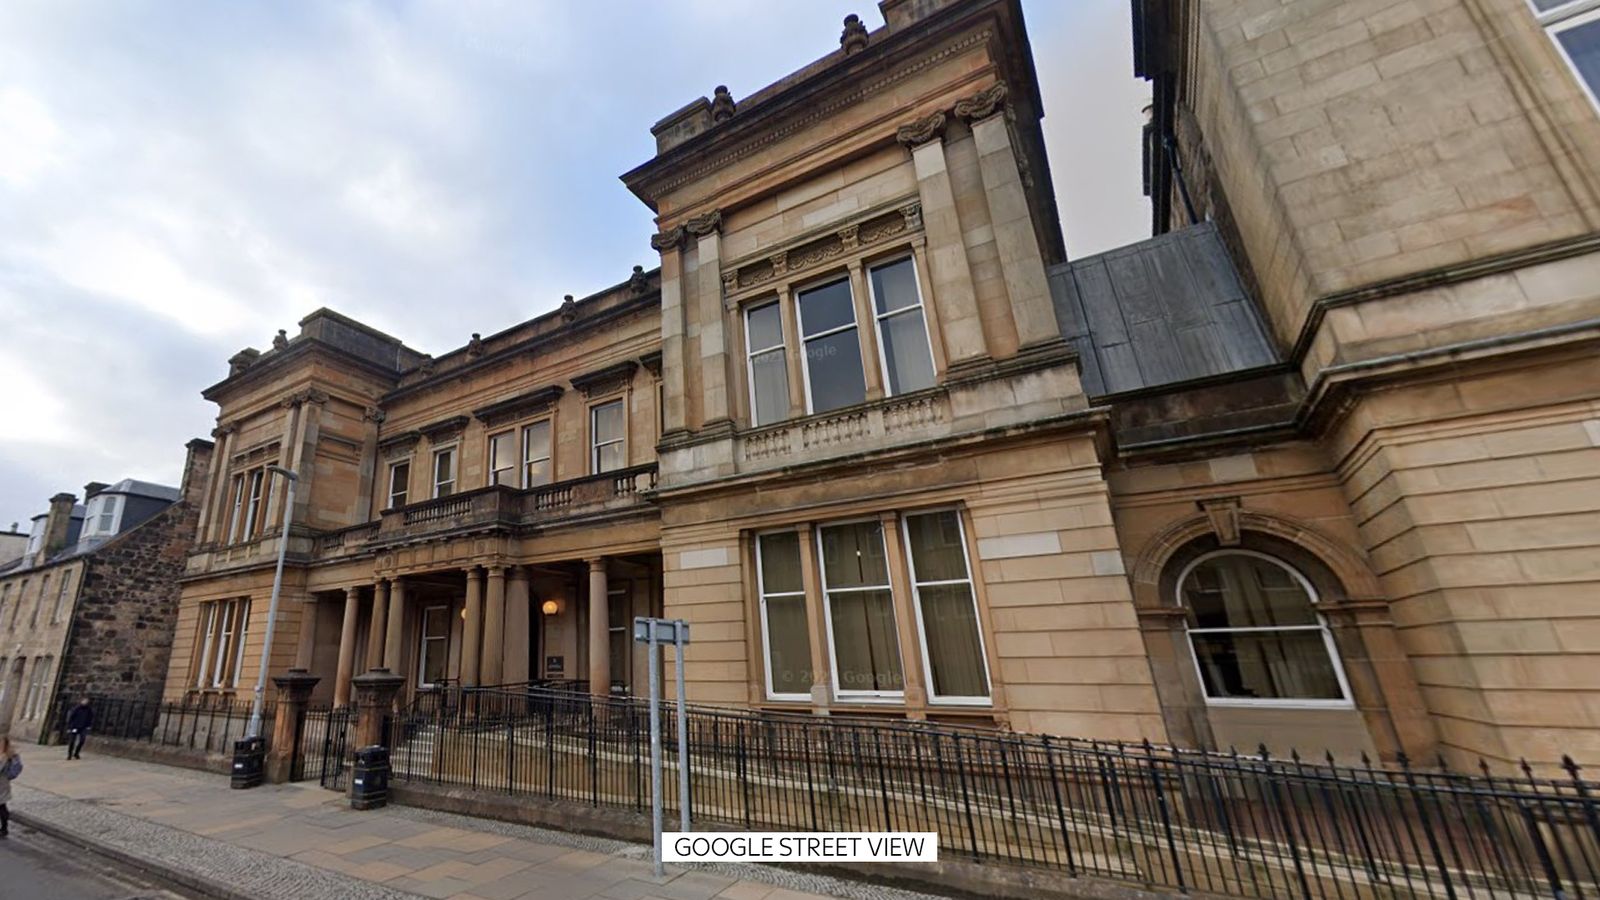 Rapist jailed for sexual and violent attacks in Stirling spanning a decade